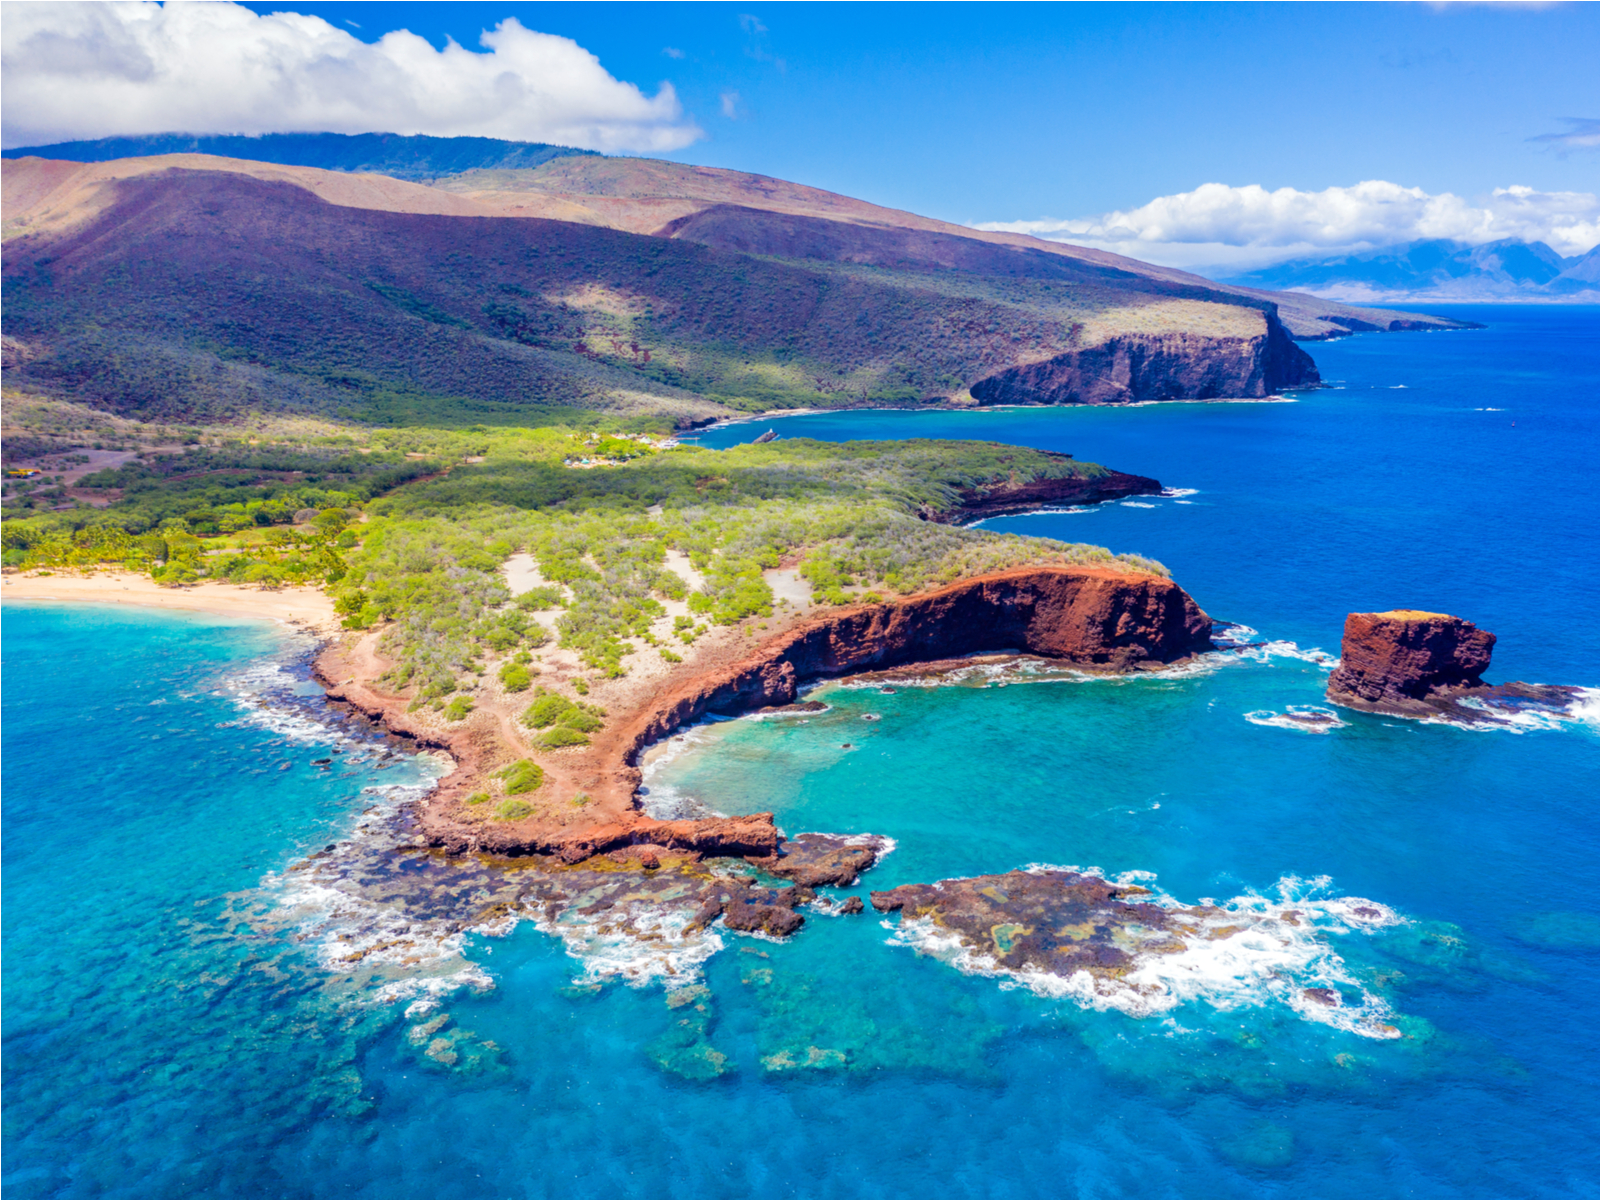 Aerial view of Lanai for a map of the Hawaiian islands